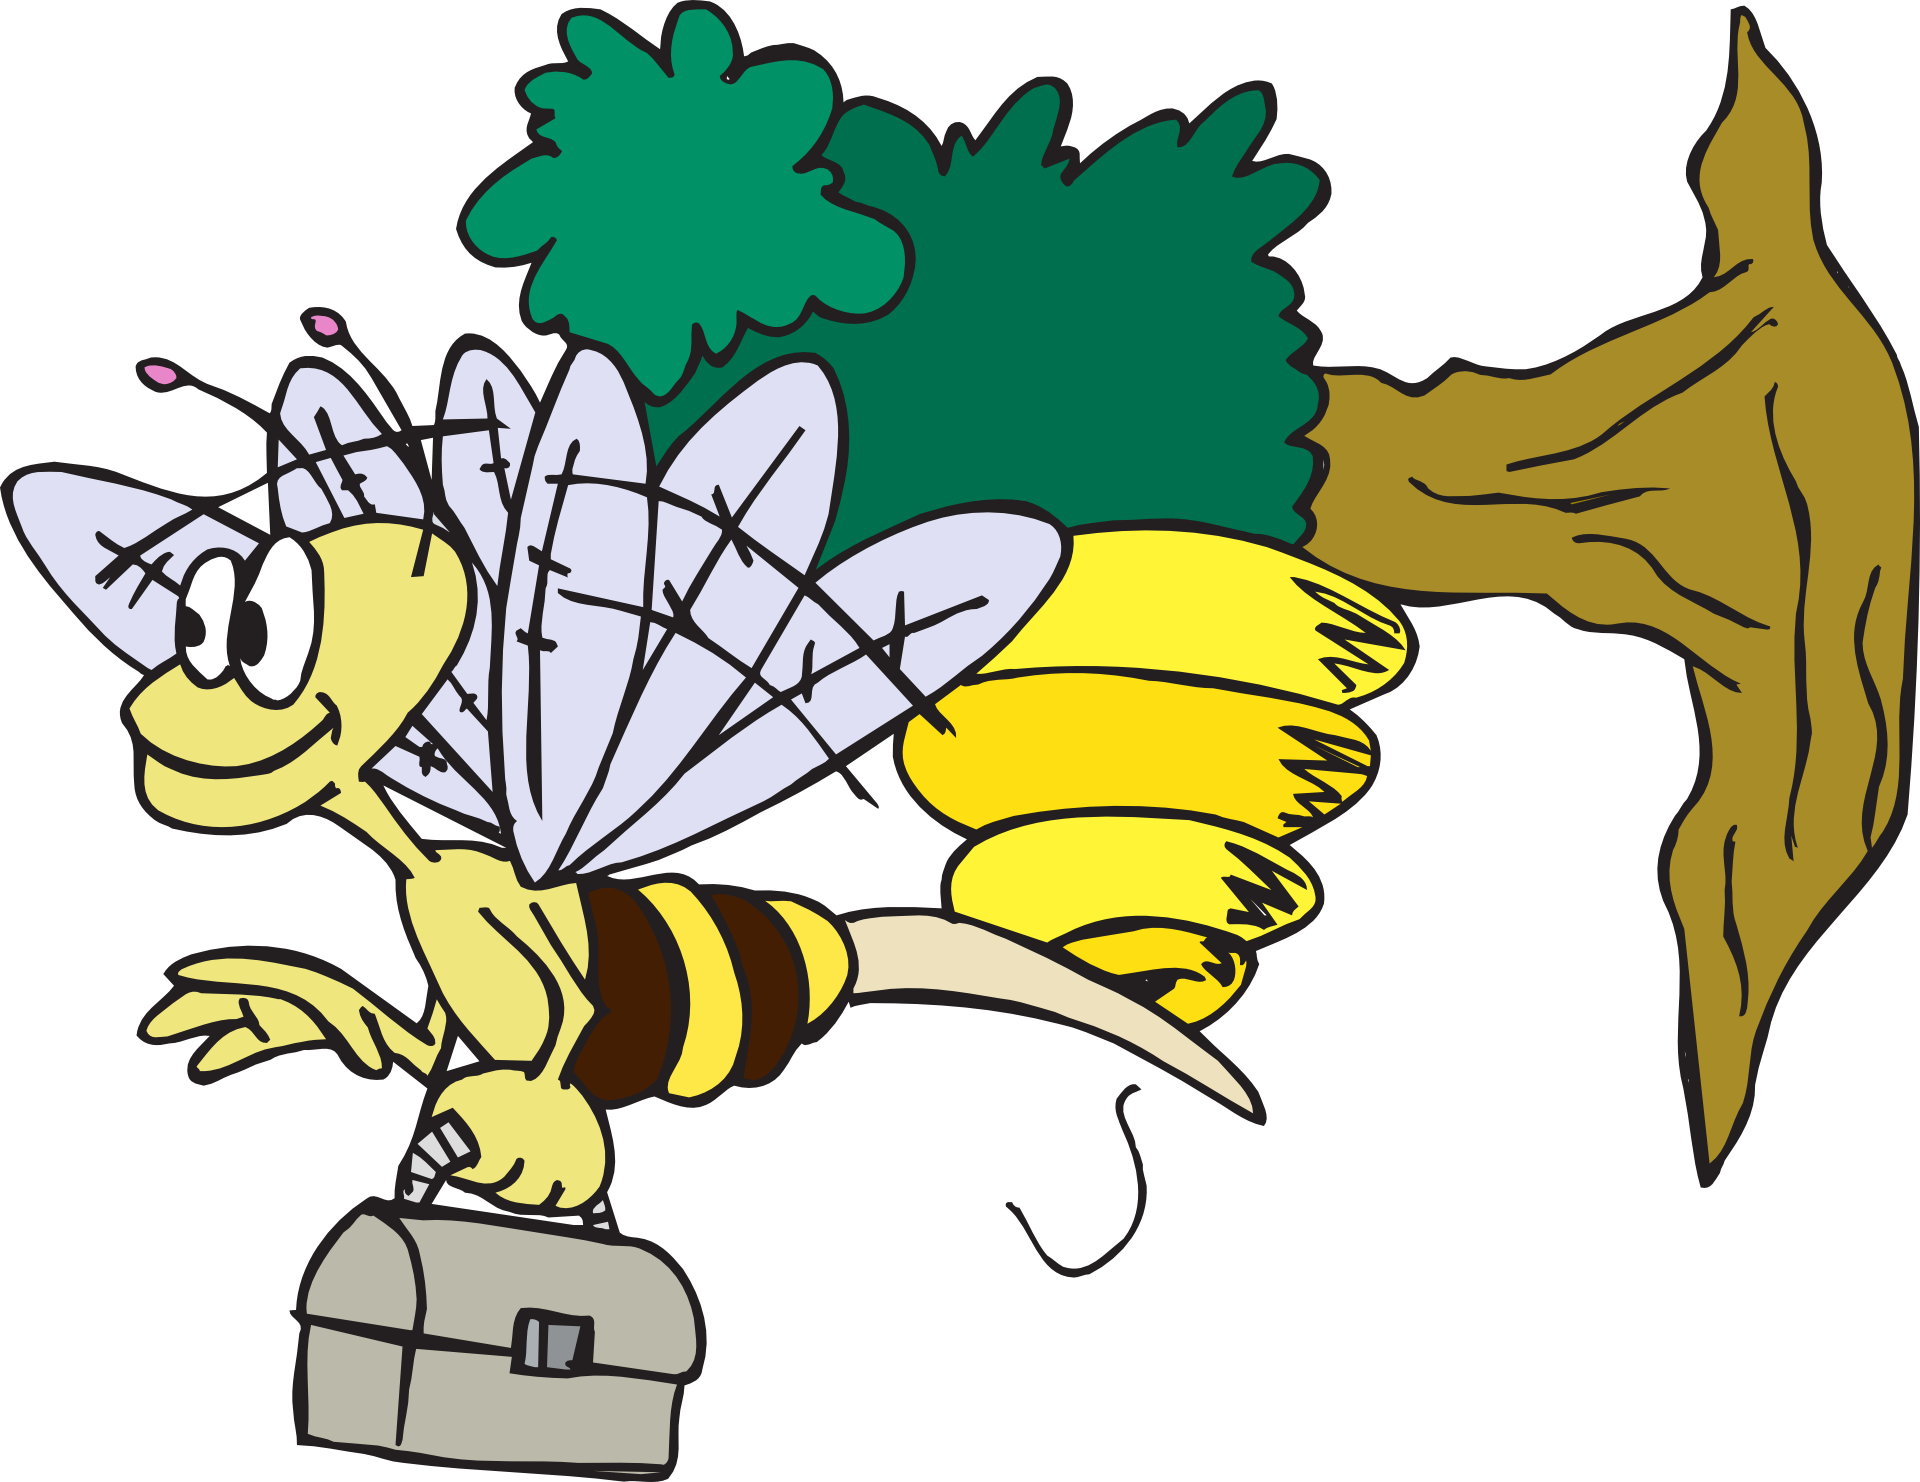 Home going bee drawing free image download